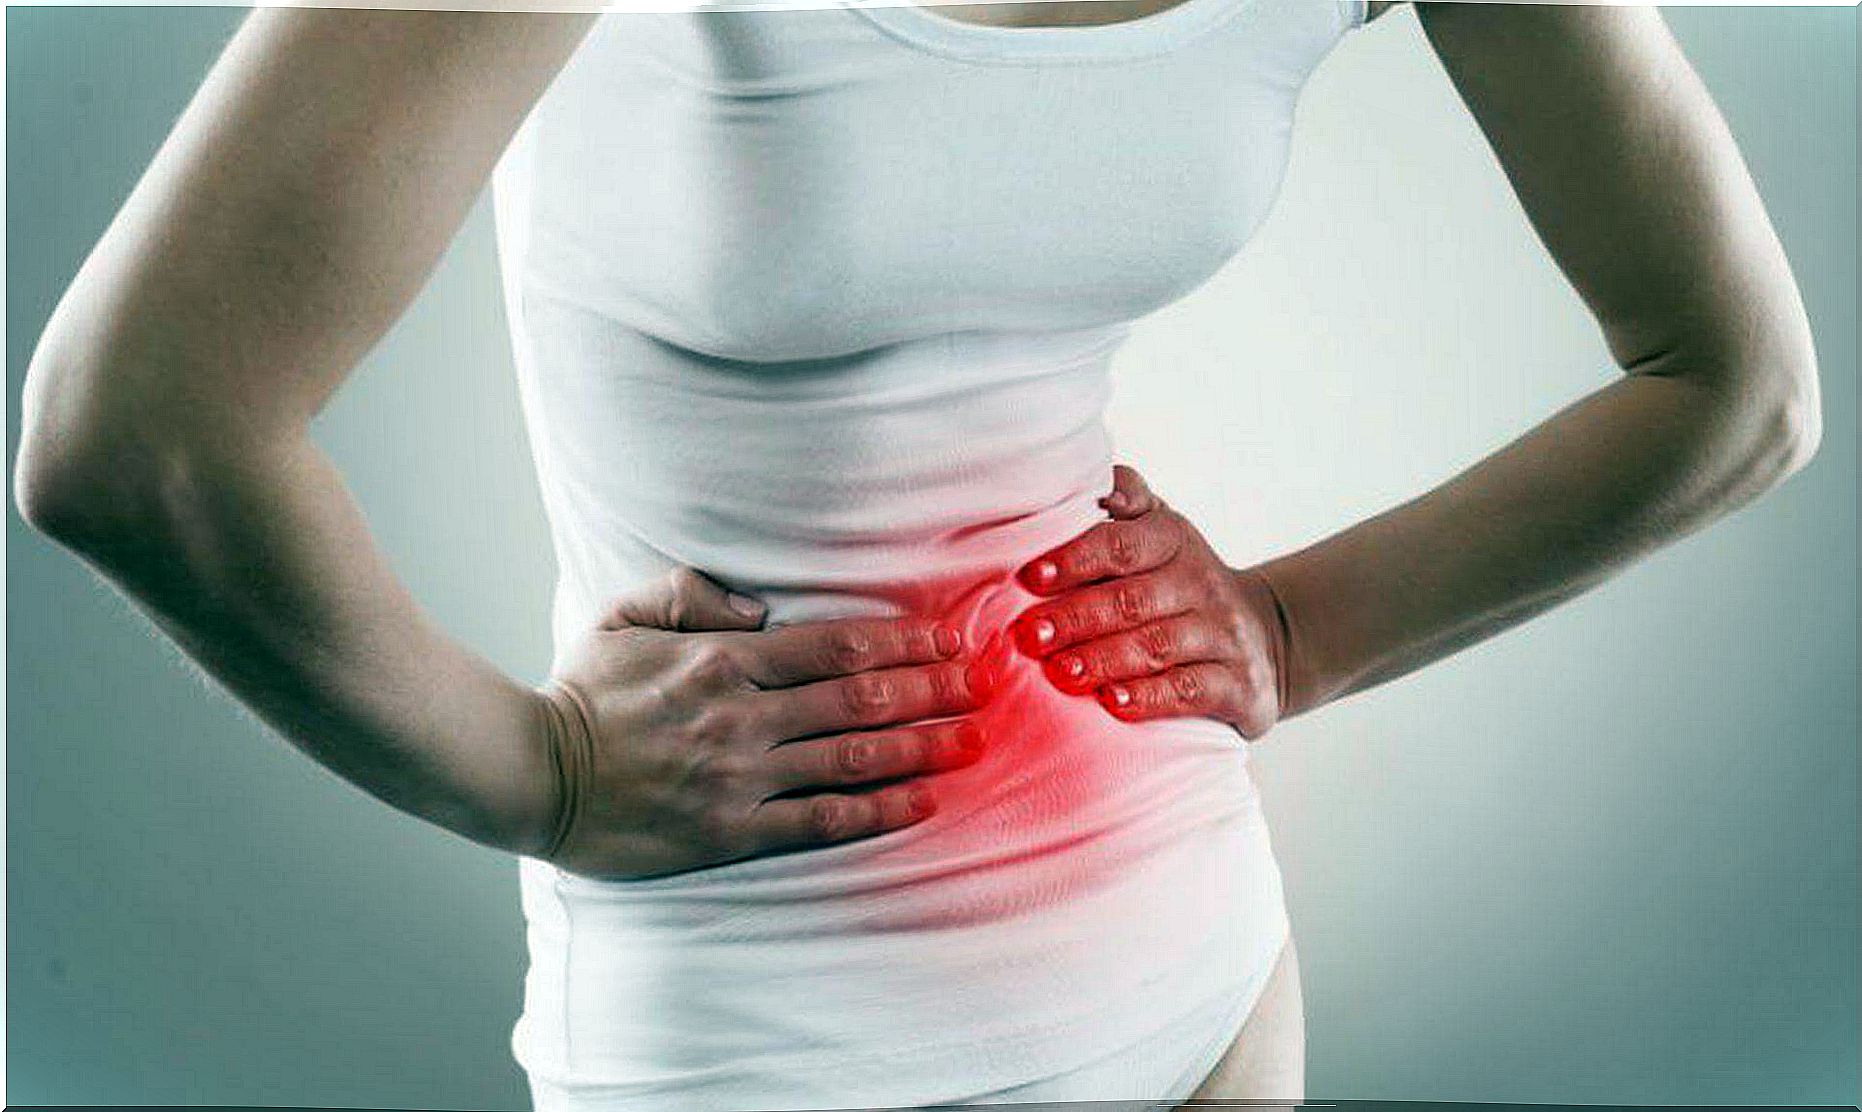 Relieve gastritis with home remedies